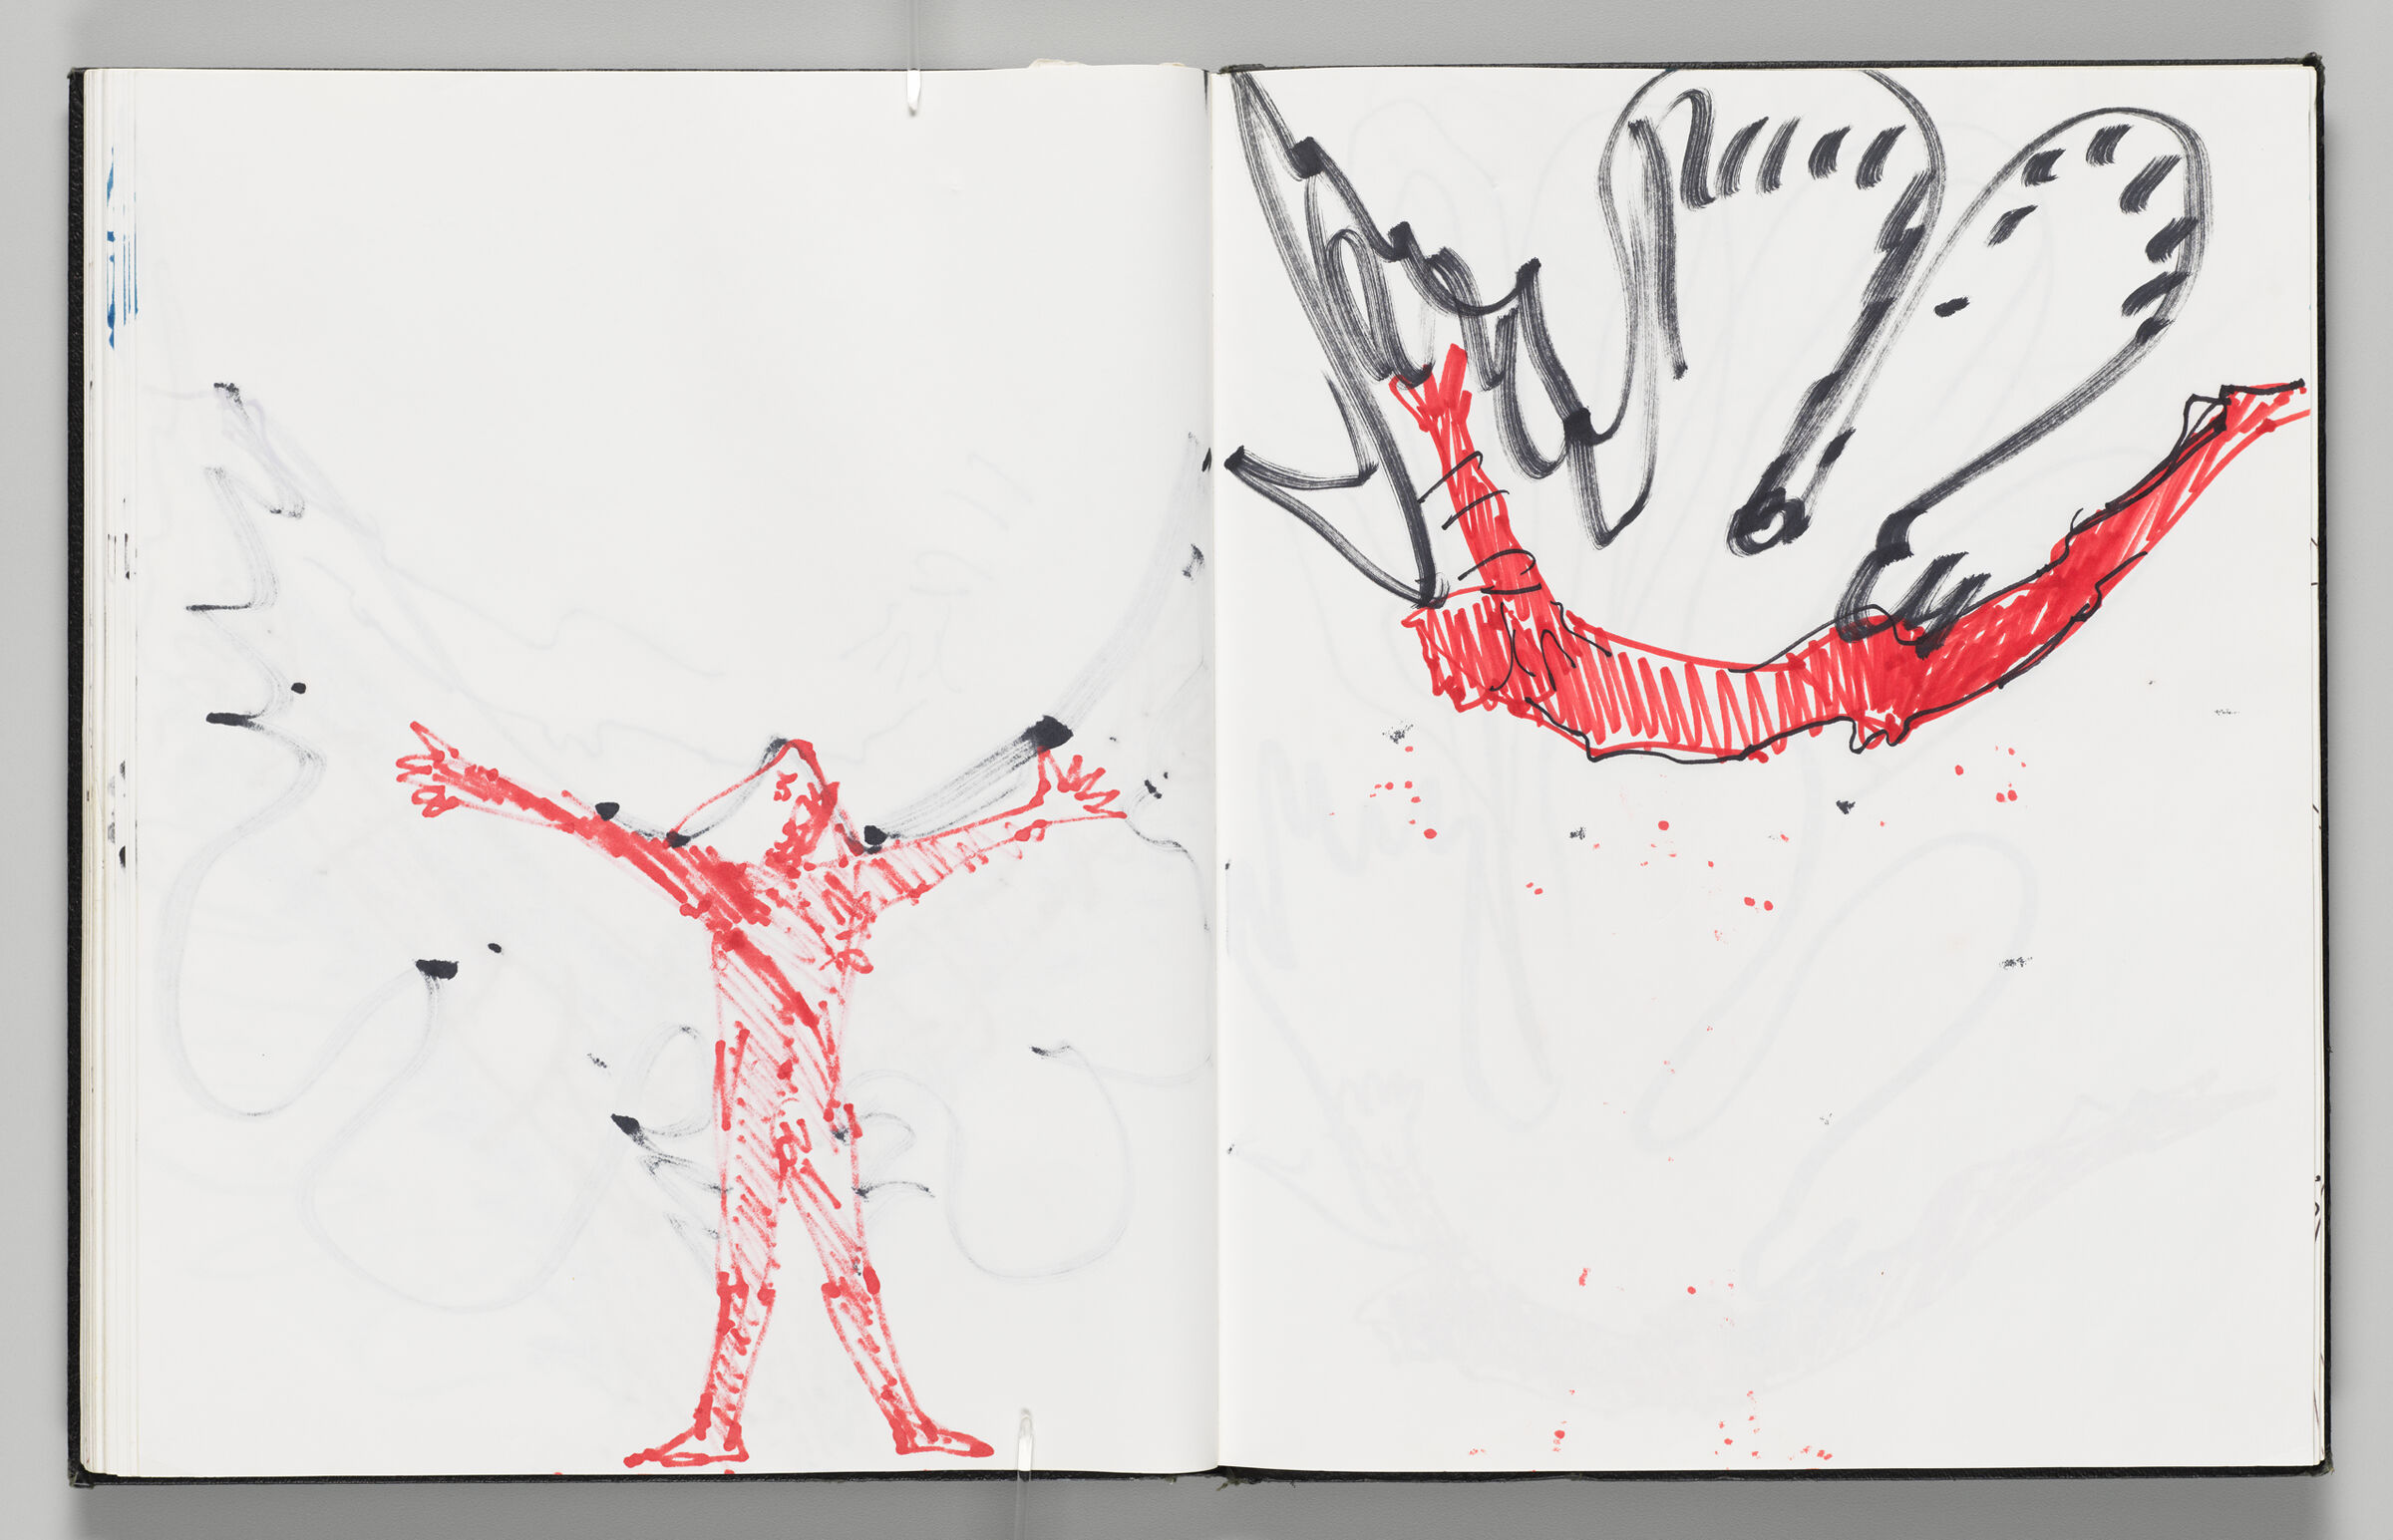 Untitled (Bleed-Through Of Previous Page, Left Page); Untitled (Sketch Of Icarus With Faint Color Transfer, Right Page)